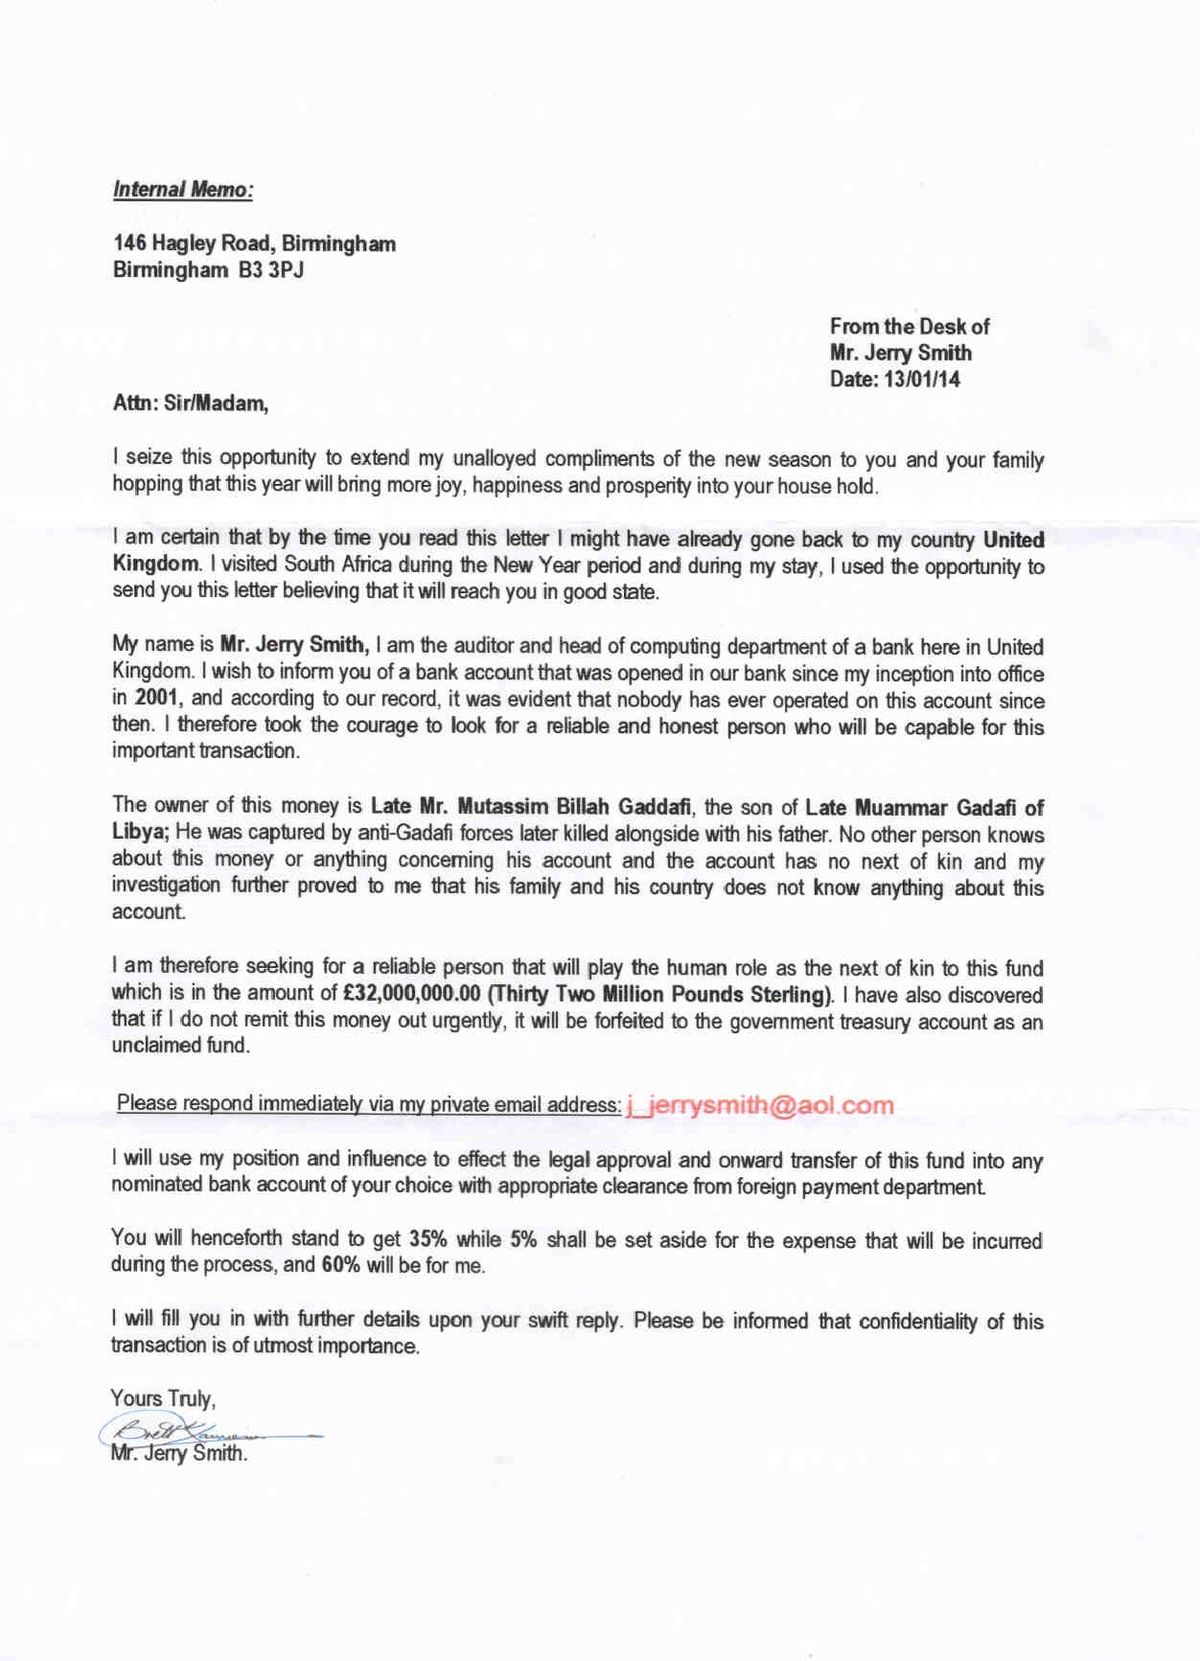 Scam letter posted within South Africa.jpg